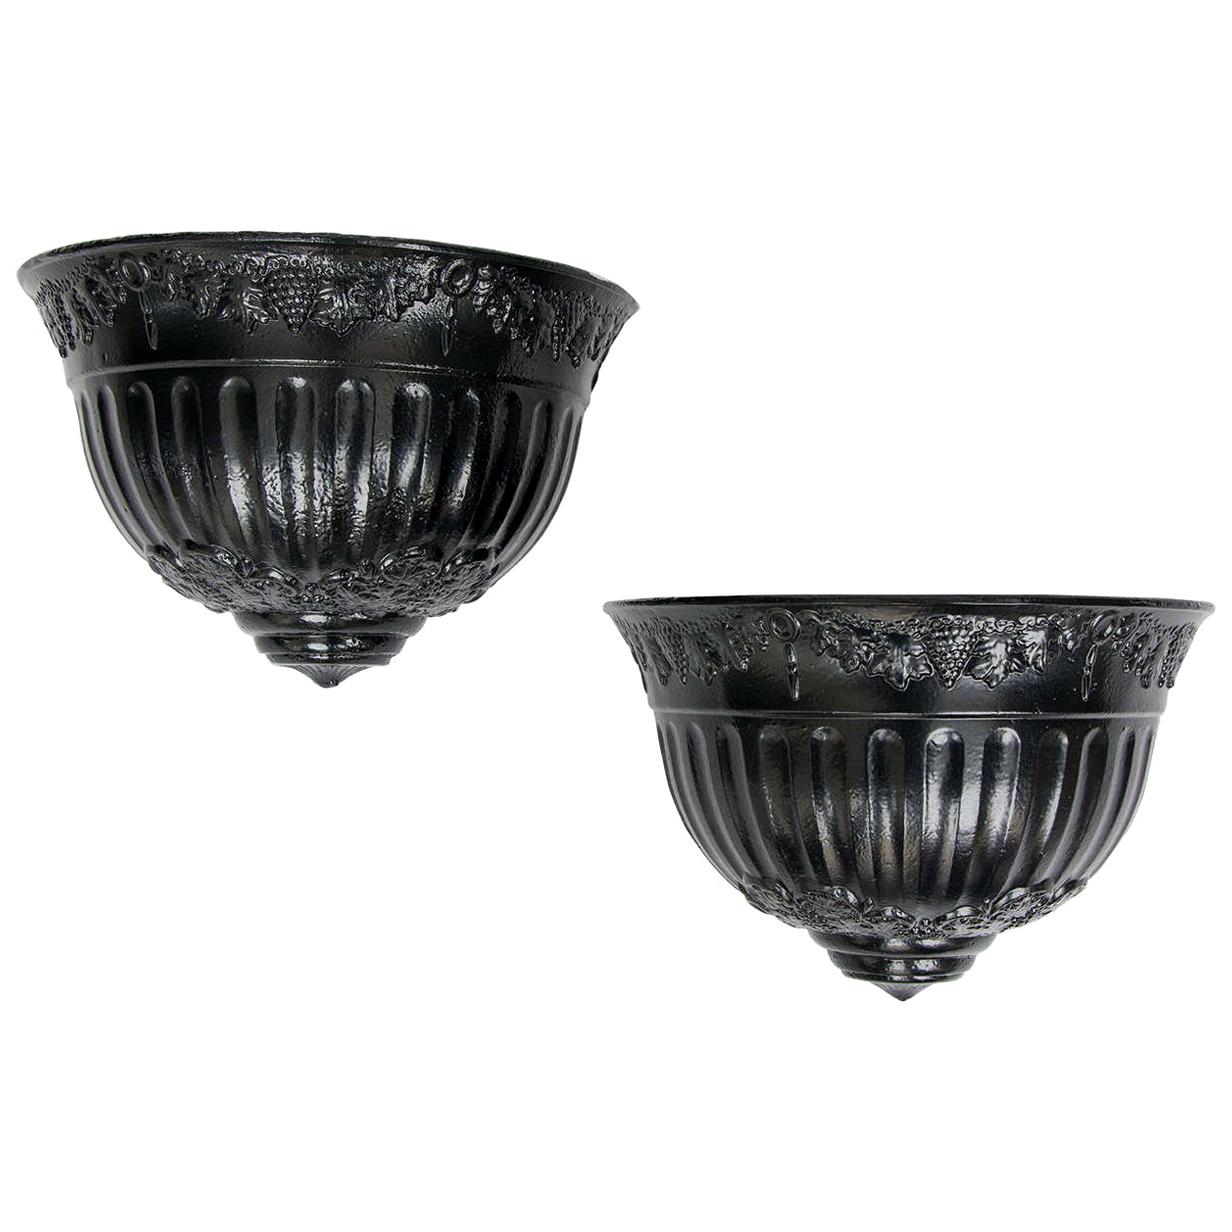  PAIR Georgian Regency Period Wall Planters Cast Iron with Good Detail, Ca 1820 For Sale